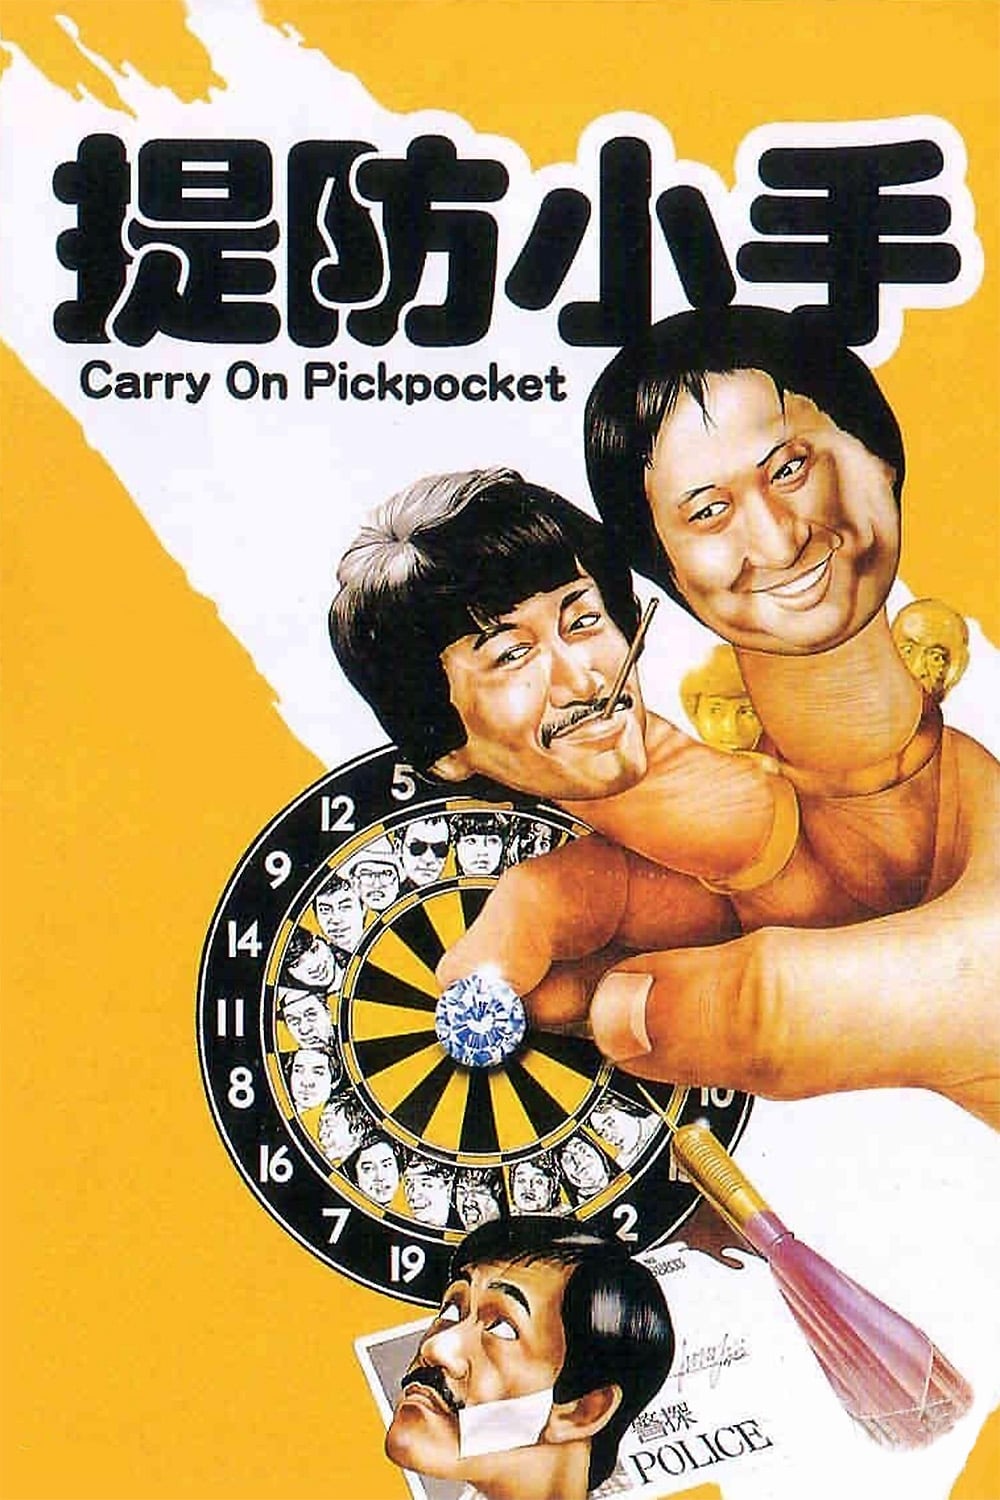 Carry on, Pickpocket (1982)